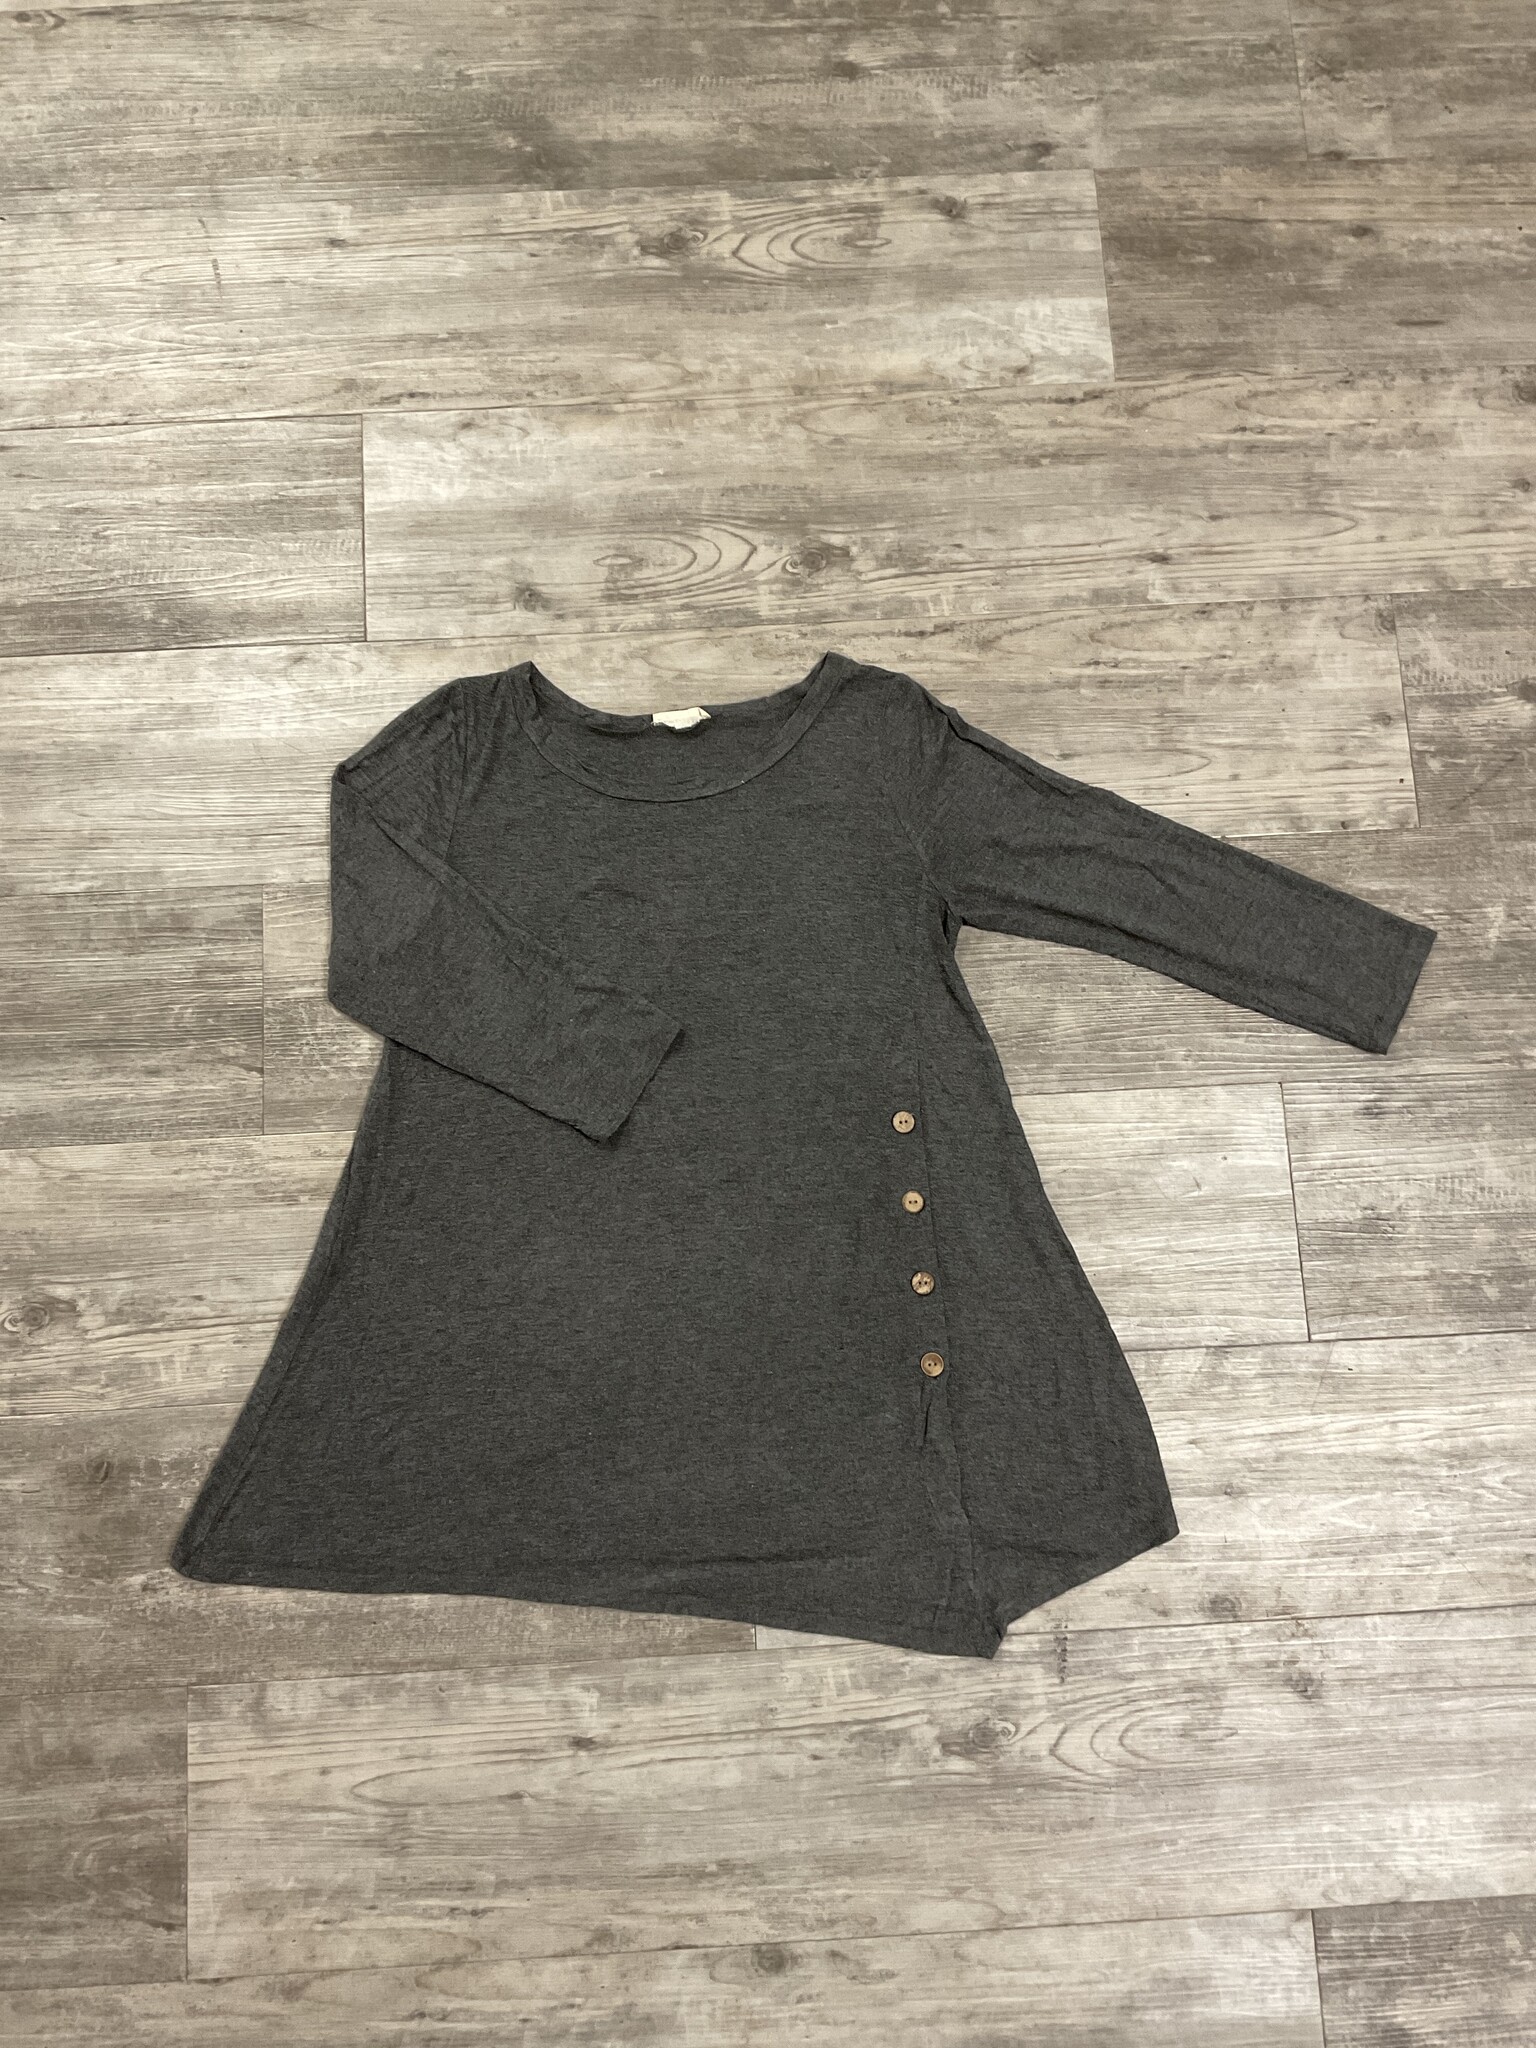 Grey Cotton Tunic with Buttons - Size L